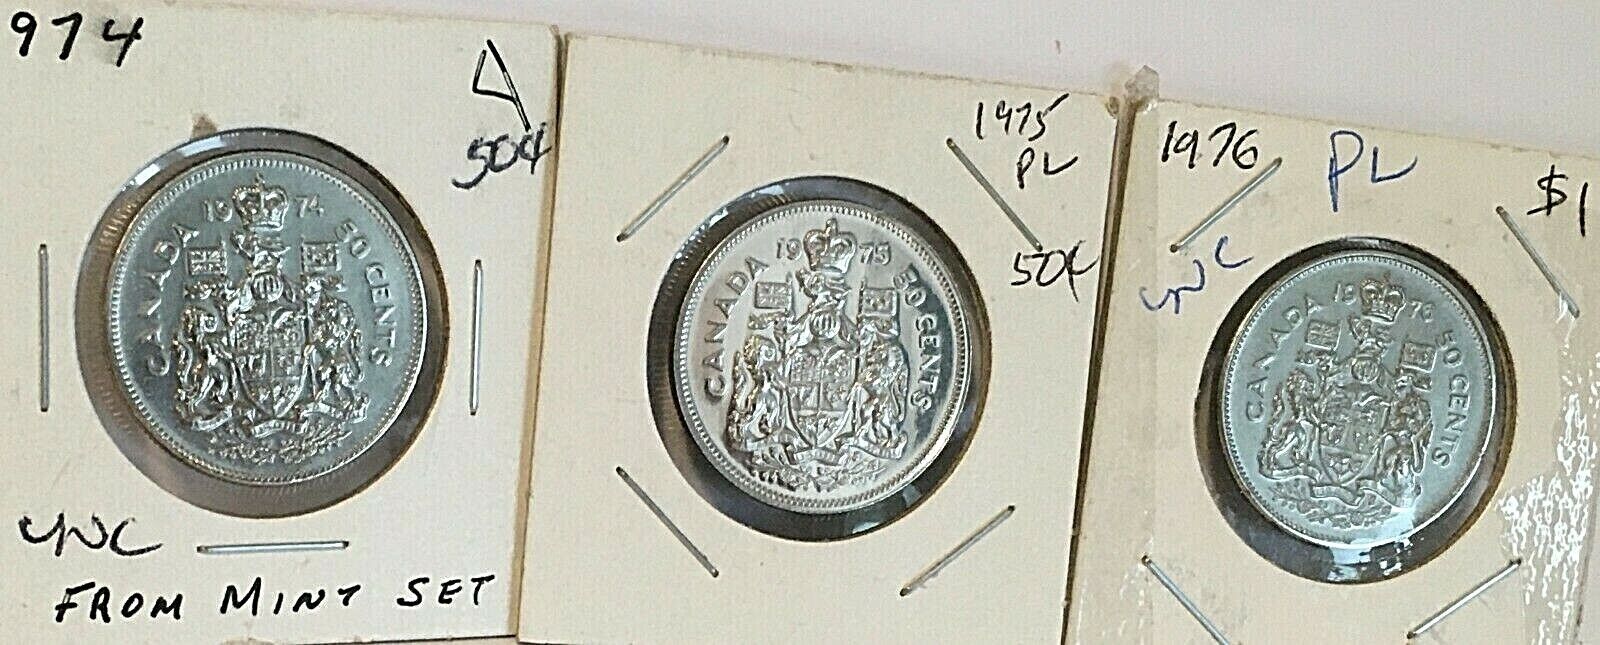 CANADA 1973 74 75  50 CENT NICKEL COIN FROM A HUGE COLLECTION 'KEEP FOLLOWING US Без бренда